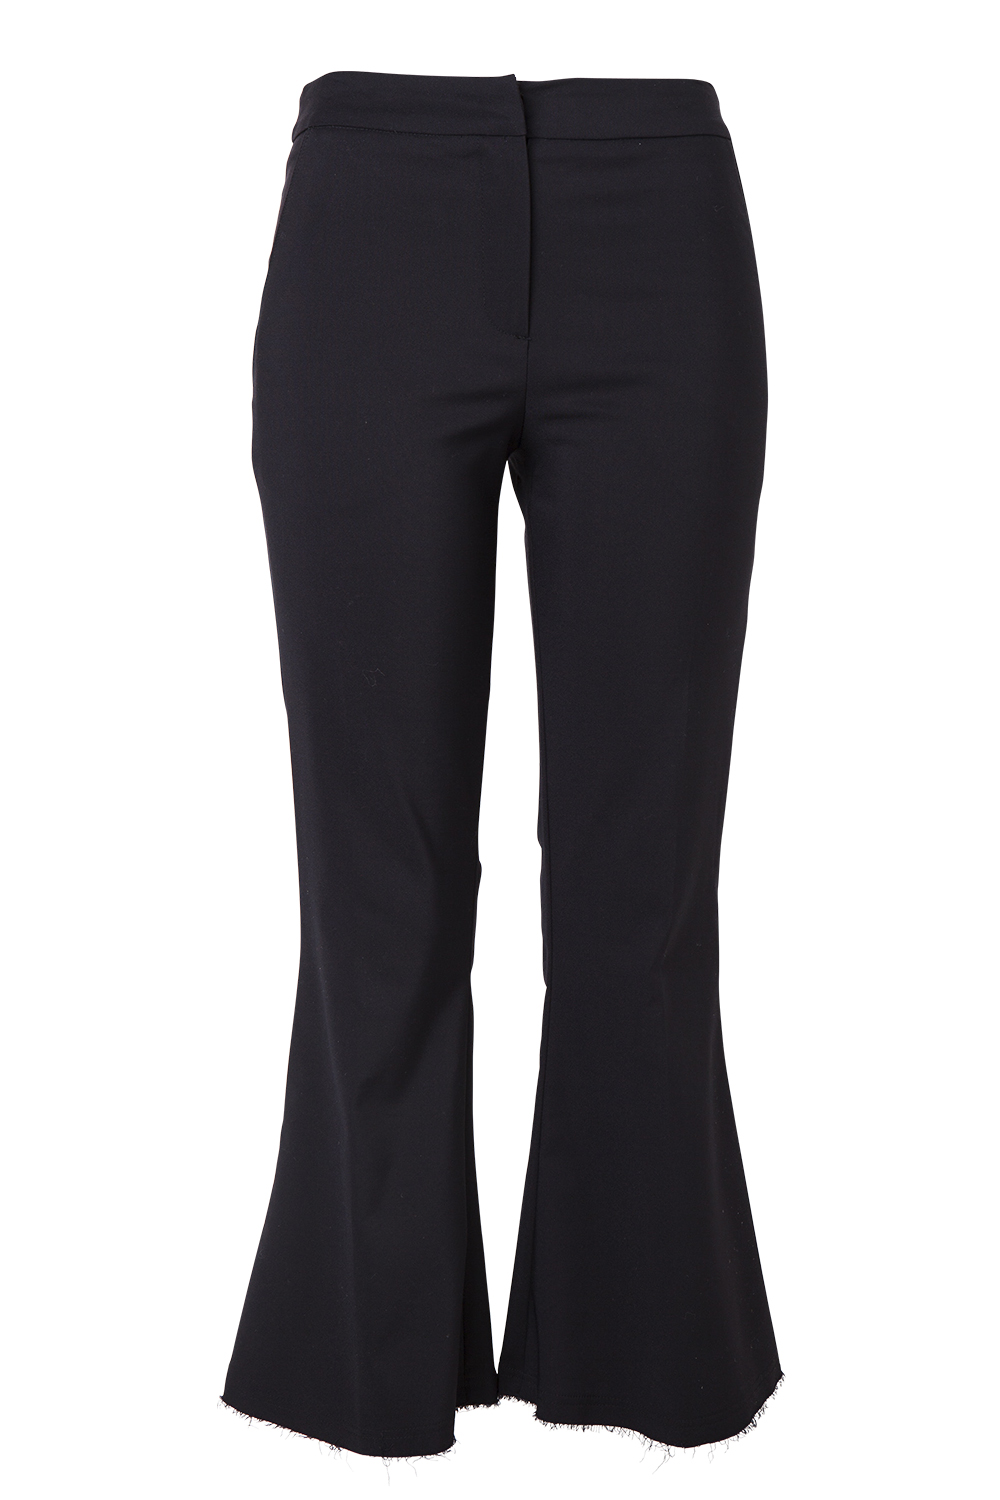 Trousers, $357, by Taylor.